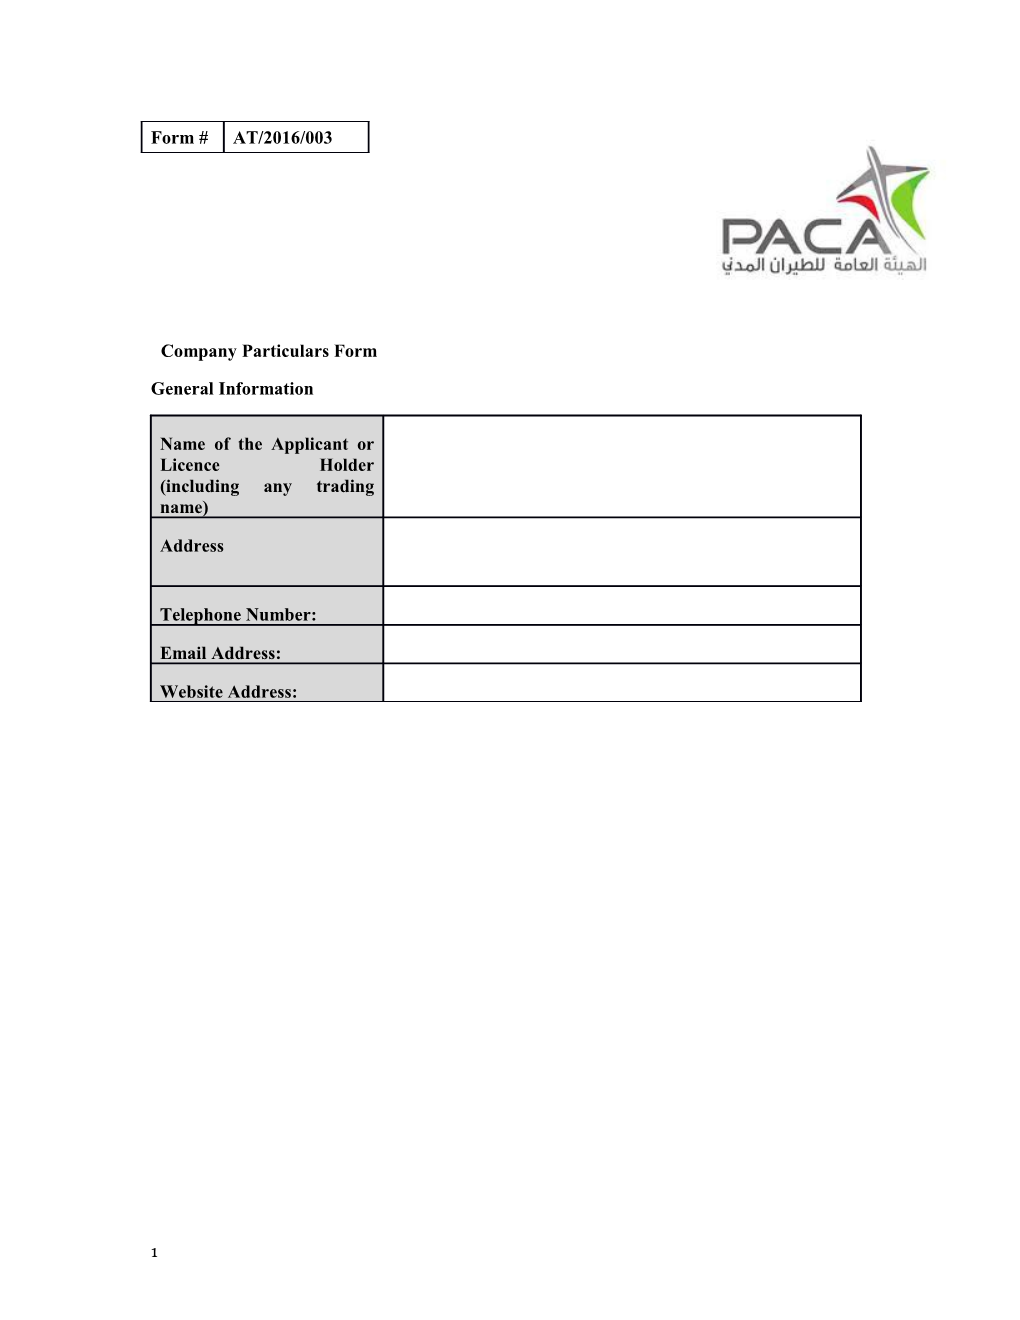 Company Particulars Form